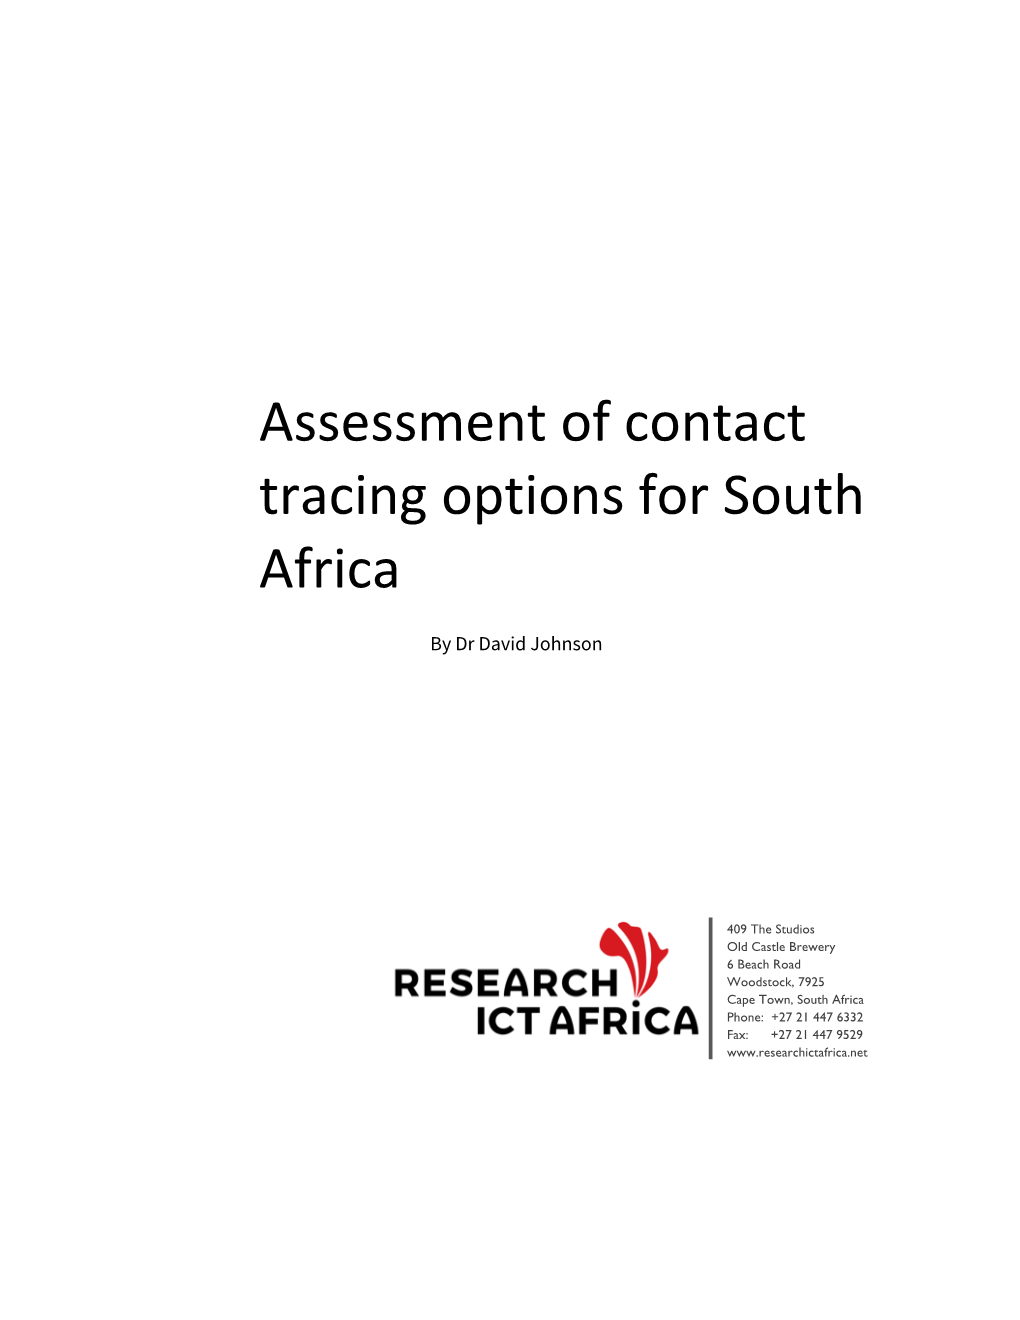 Assessment of Contact Tracing Options for South Africa